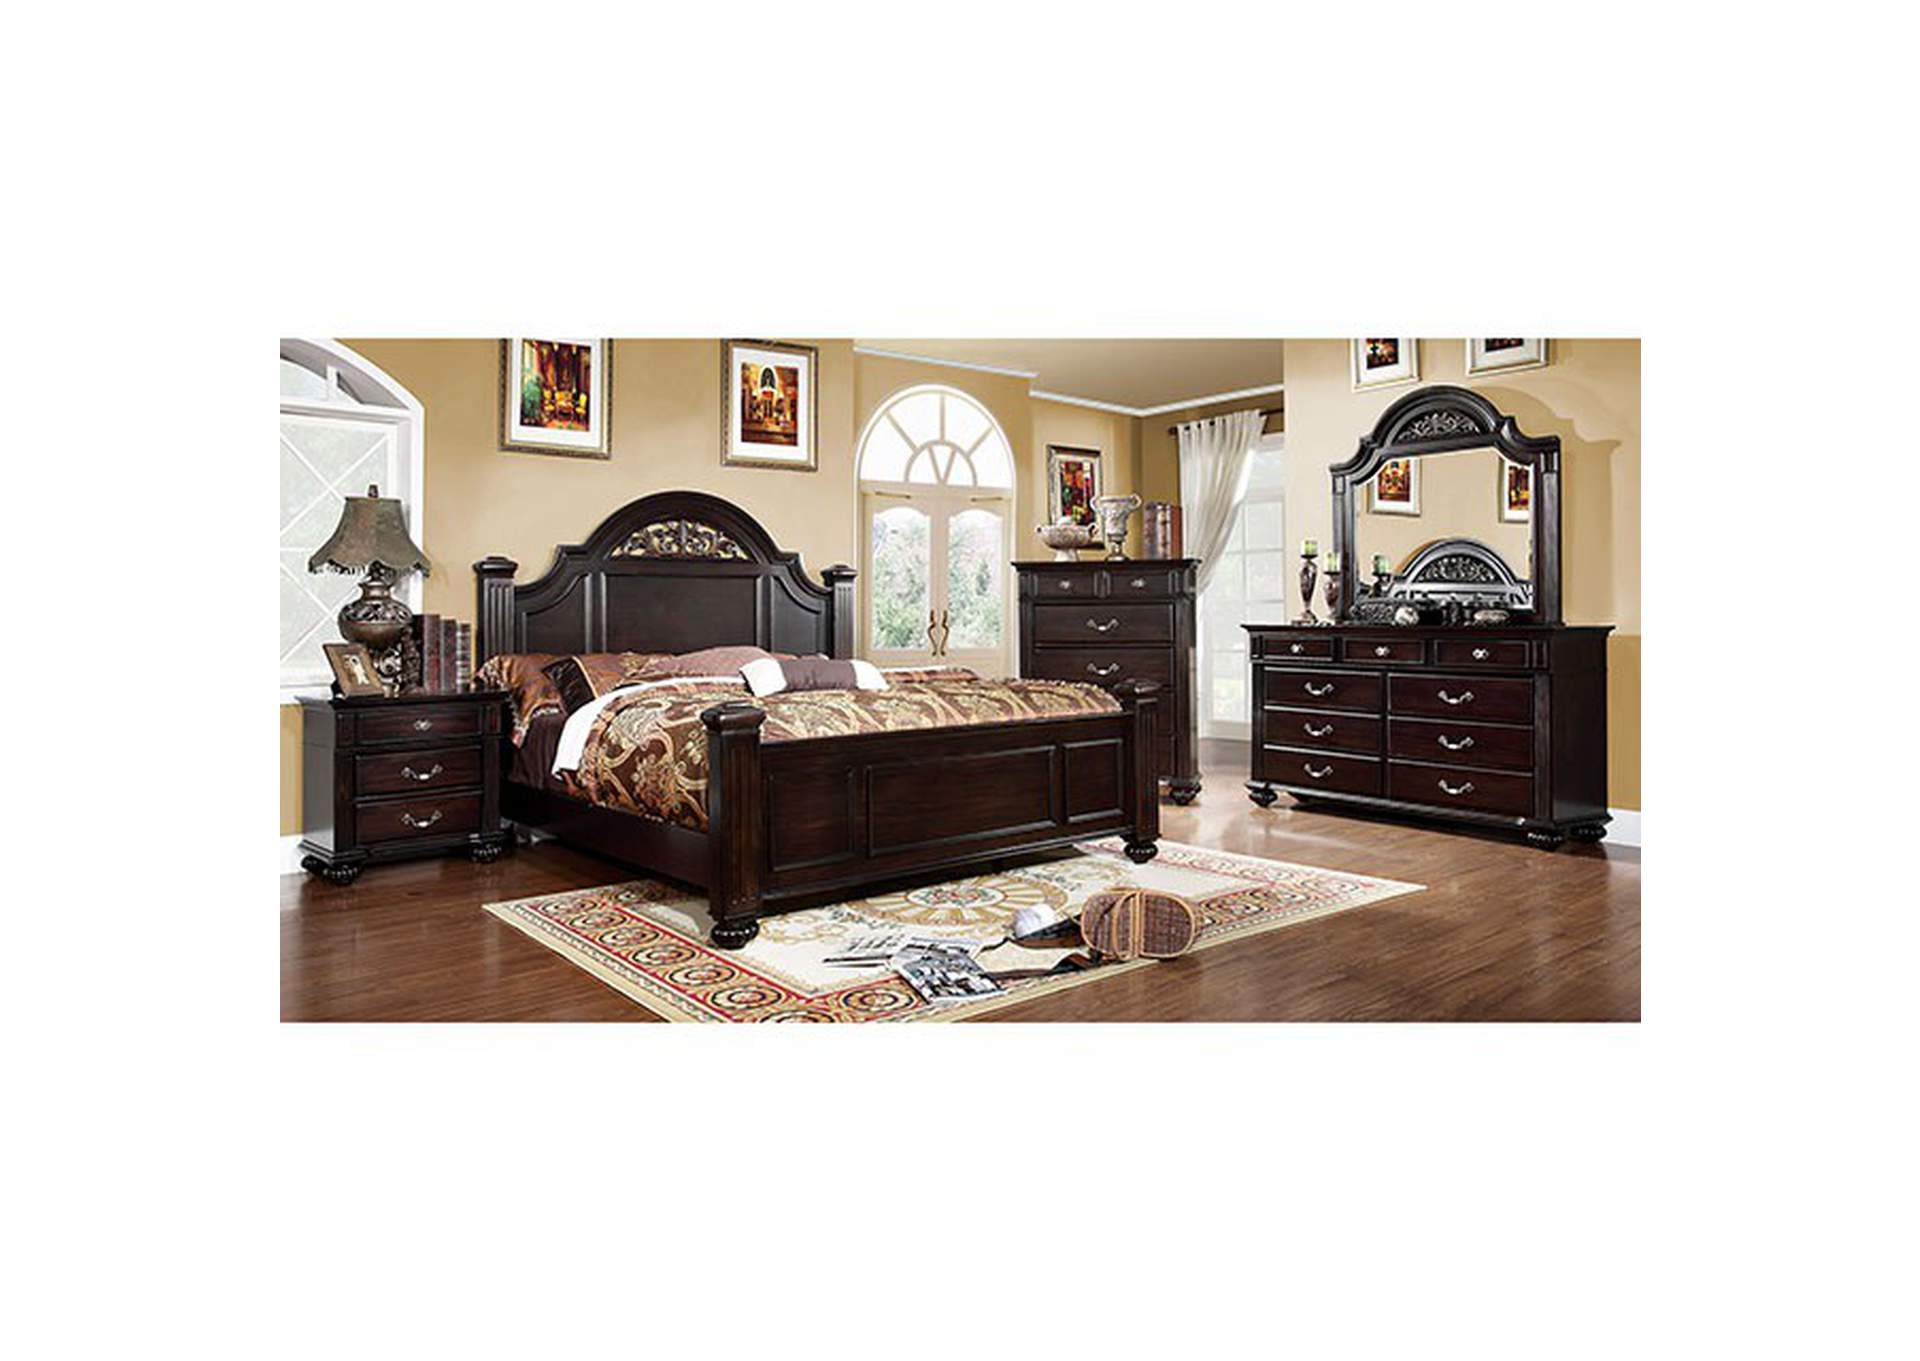 Syracuse Queen Bed,Furniture of America